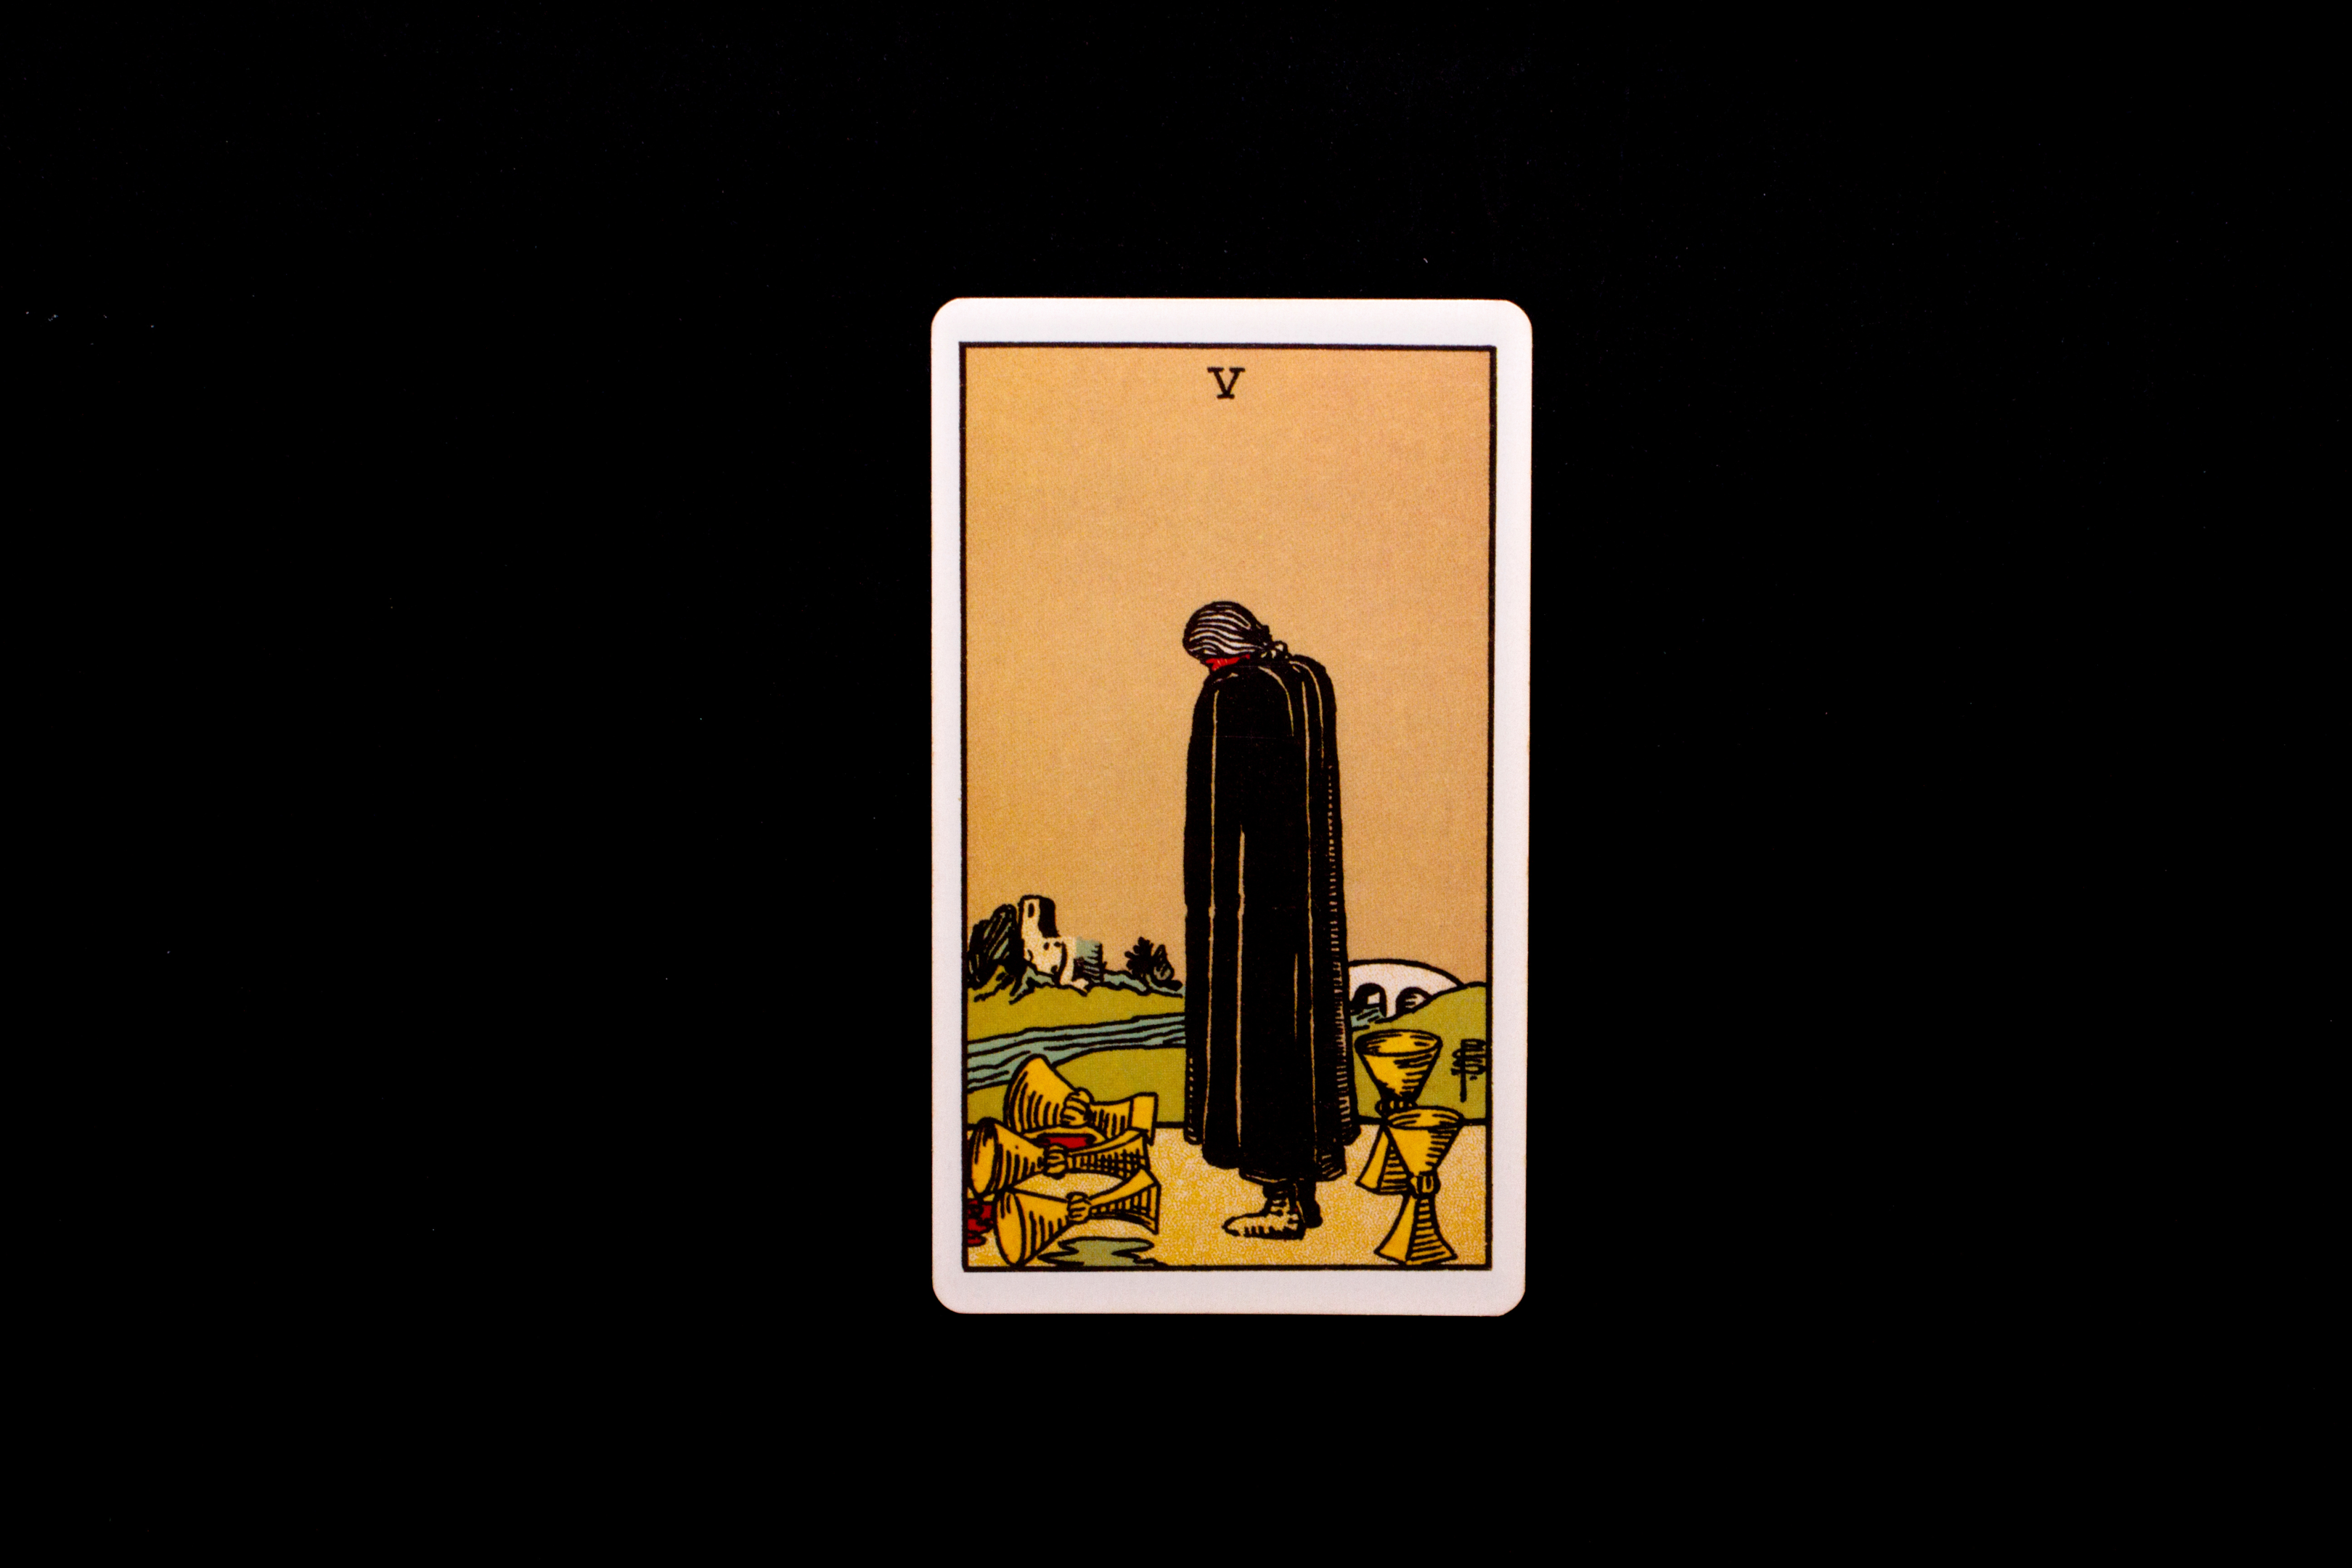 Five of cups card meanings are mixed depending on what direction you are facing.